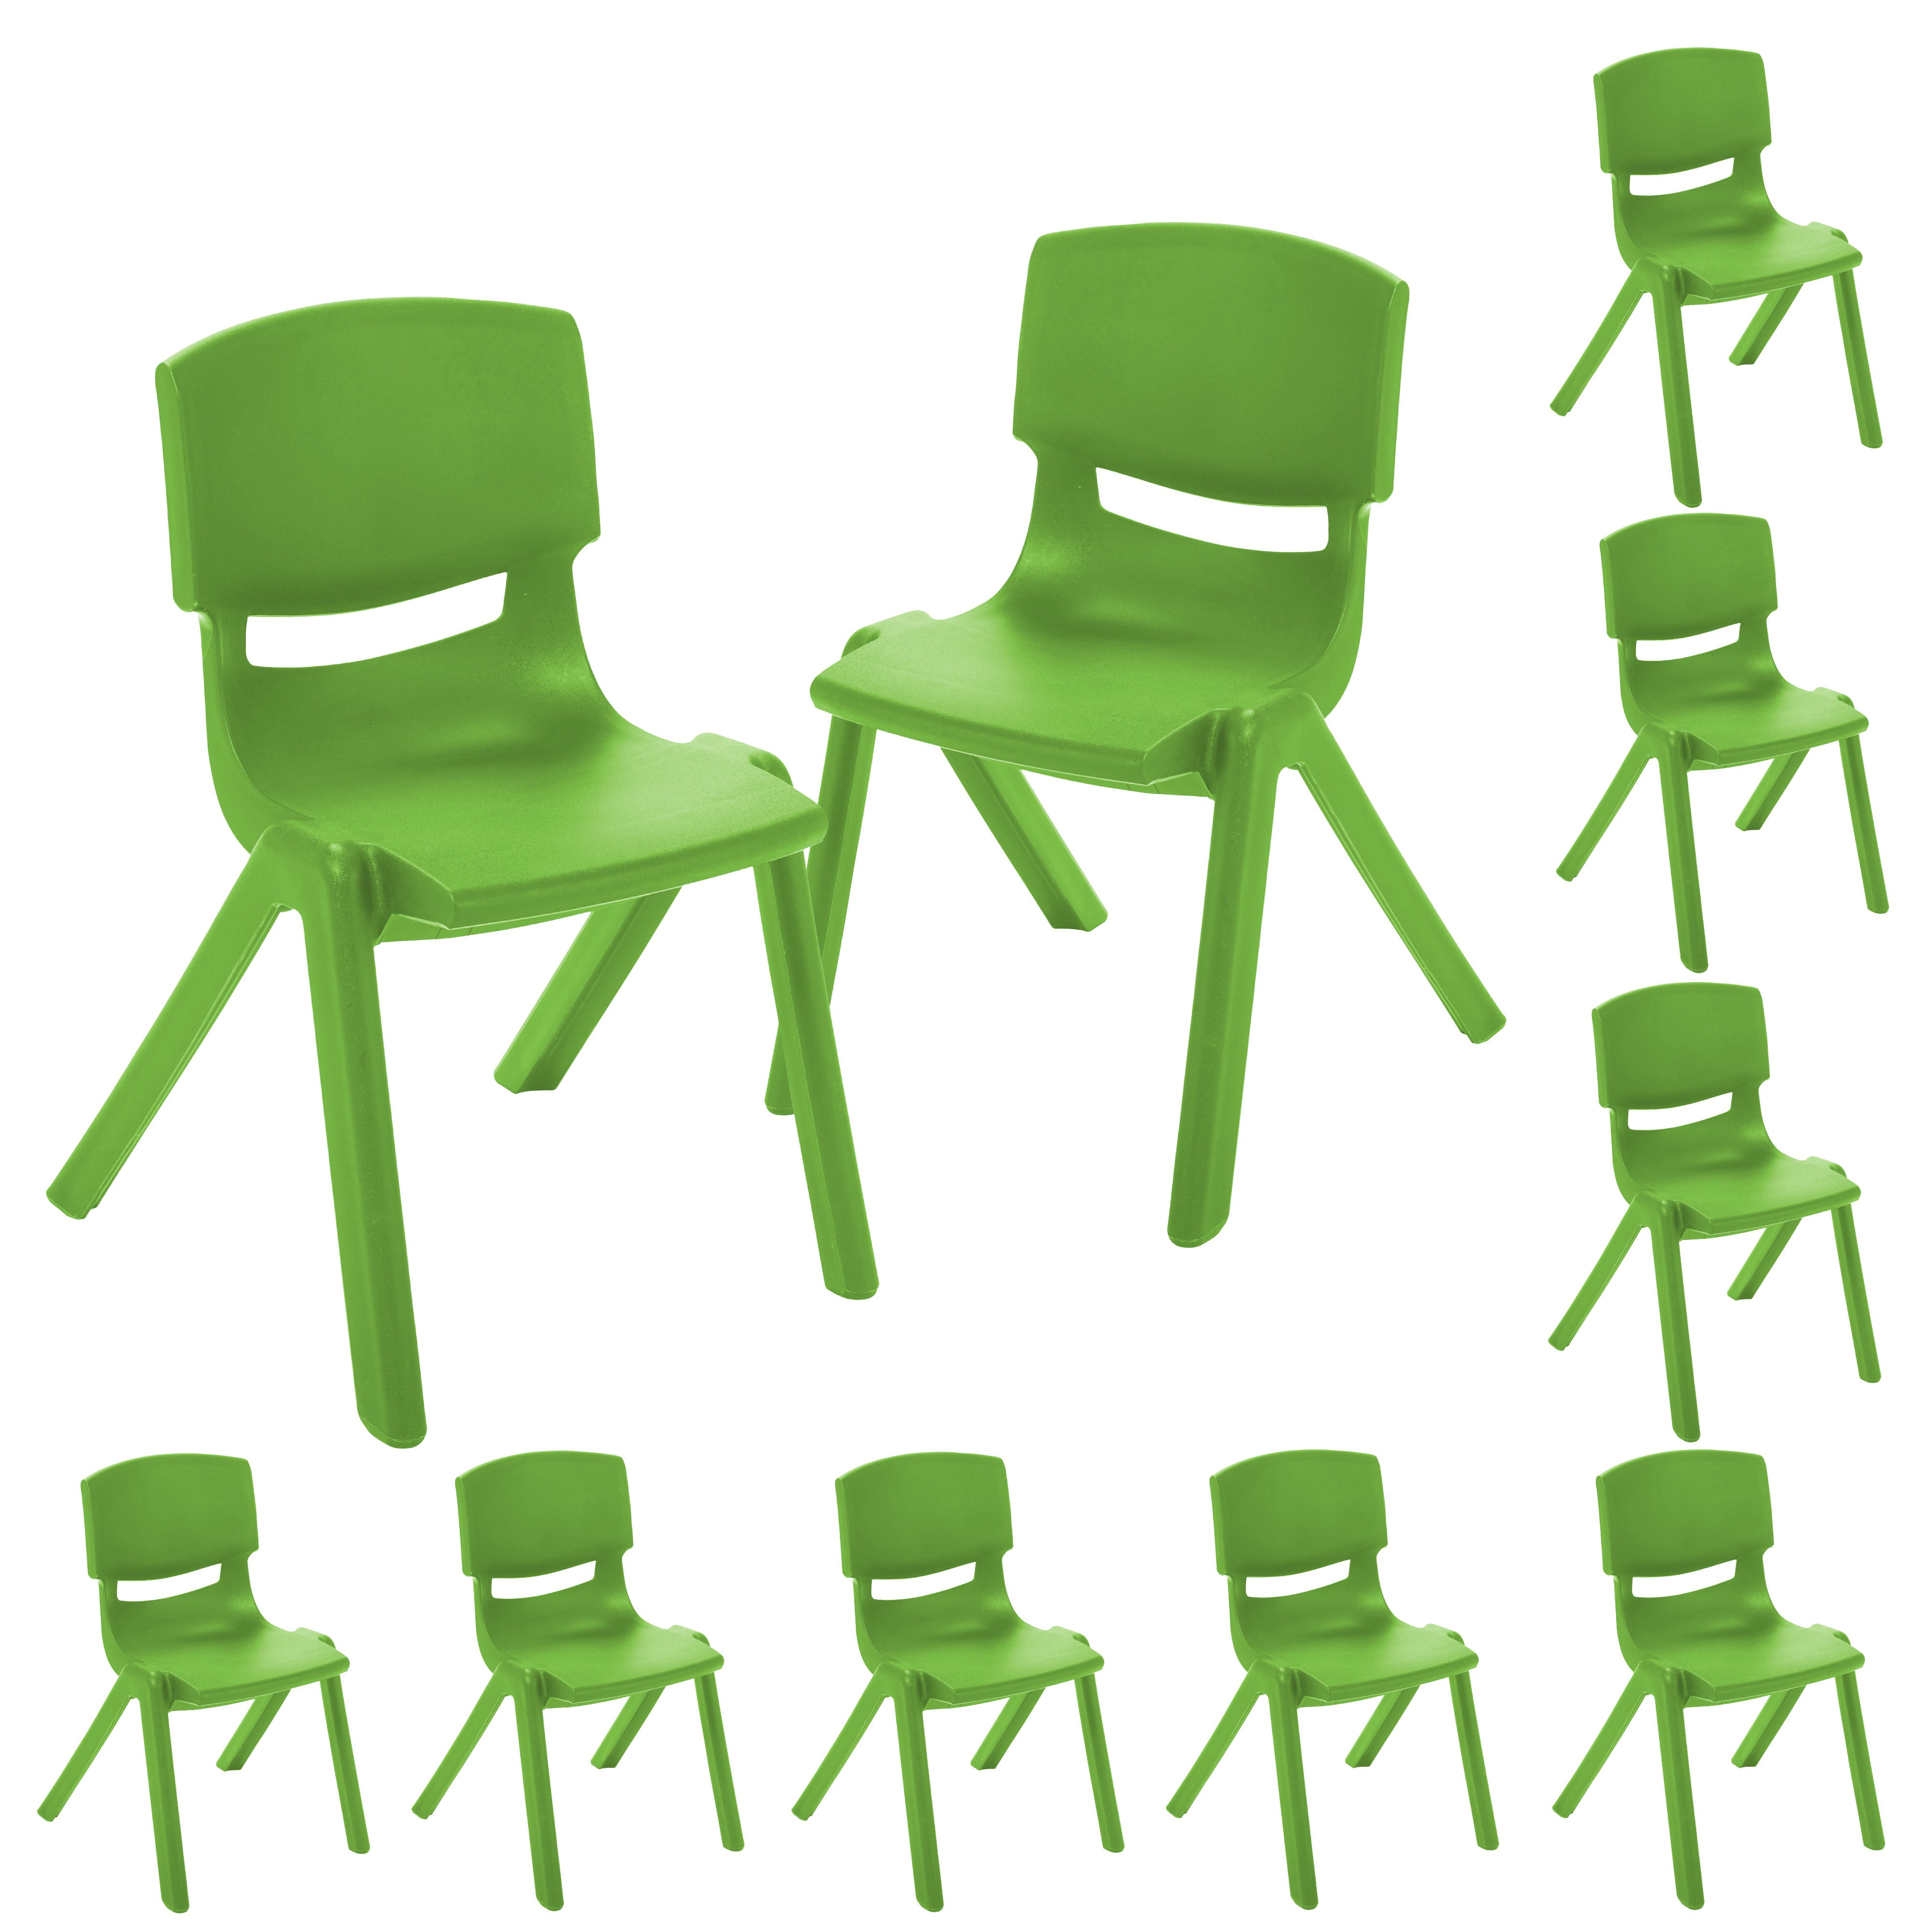 10pk Green ECR4Kids 10 inch Plastic Stackable Classroom Stack Chairs for Kids 